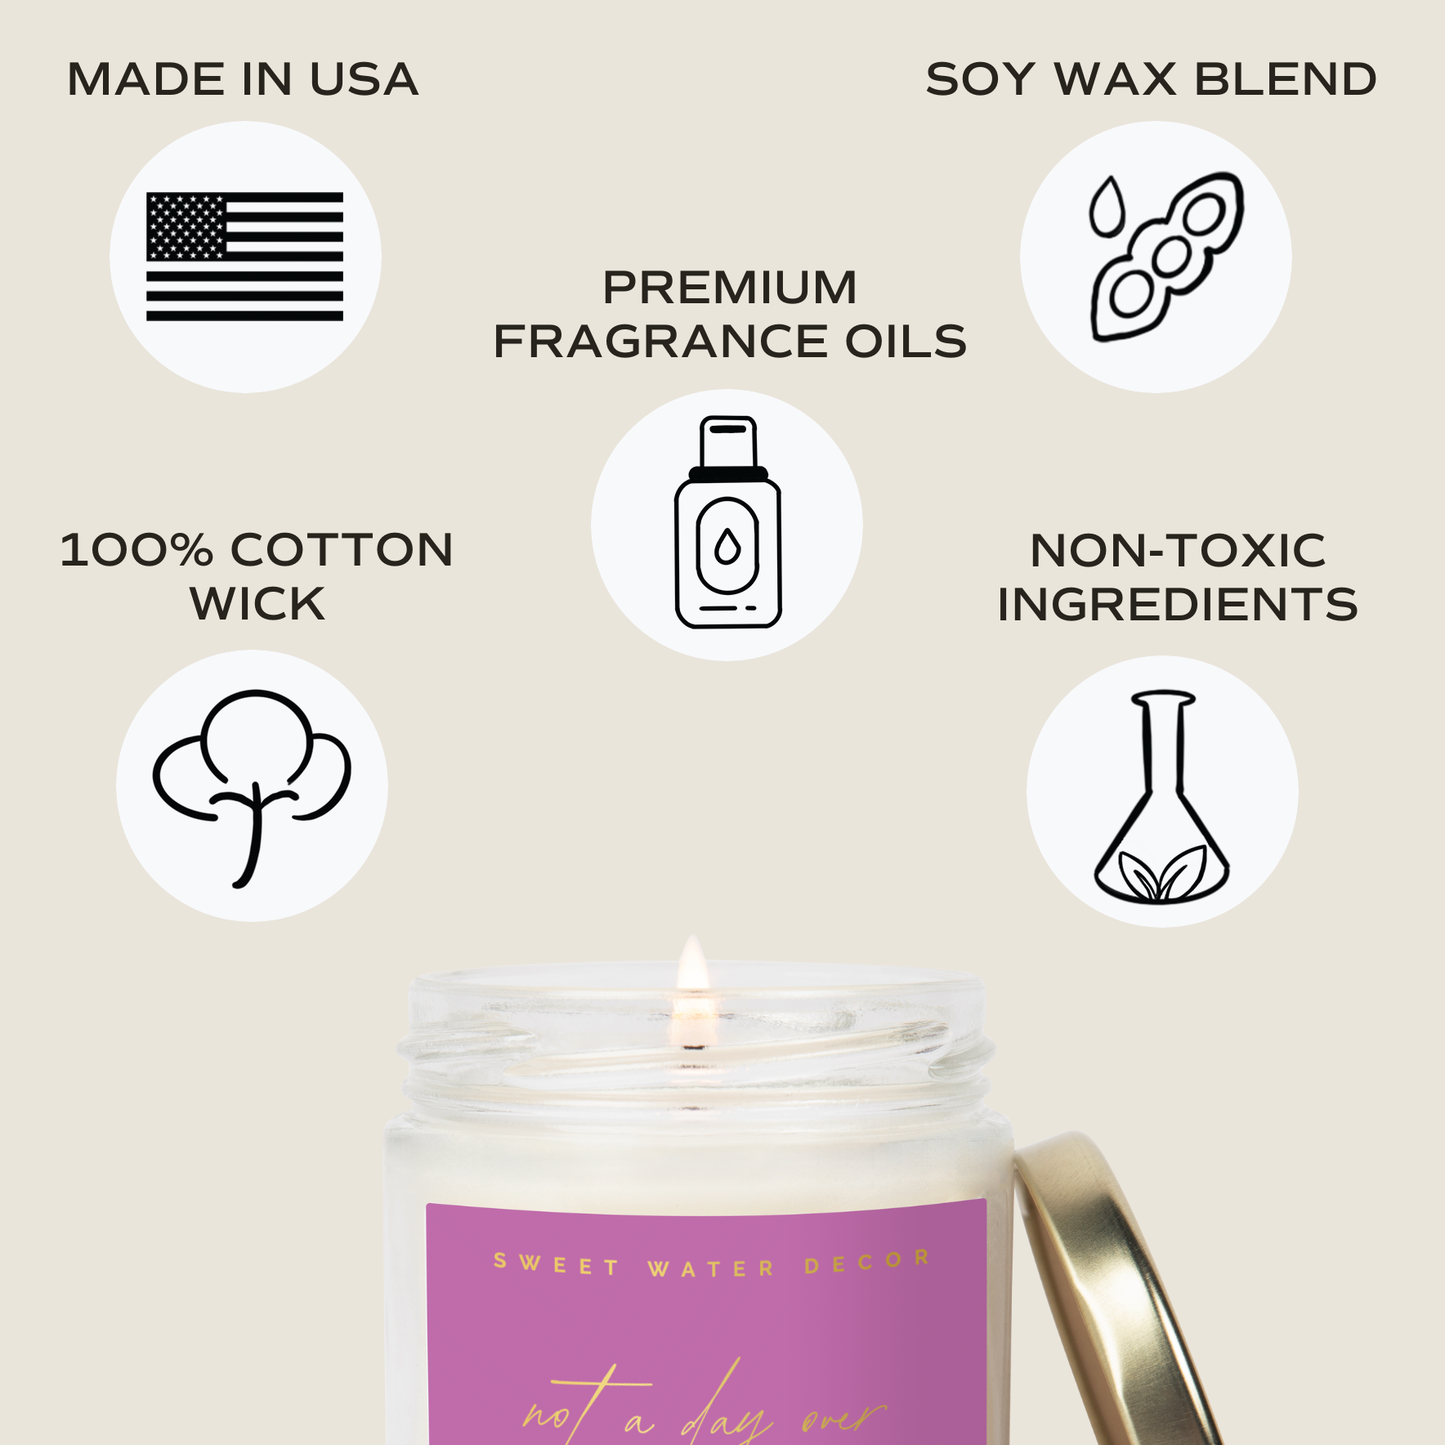 Not A Day Over Fabulous Soy Candle, 9 oz